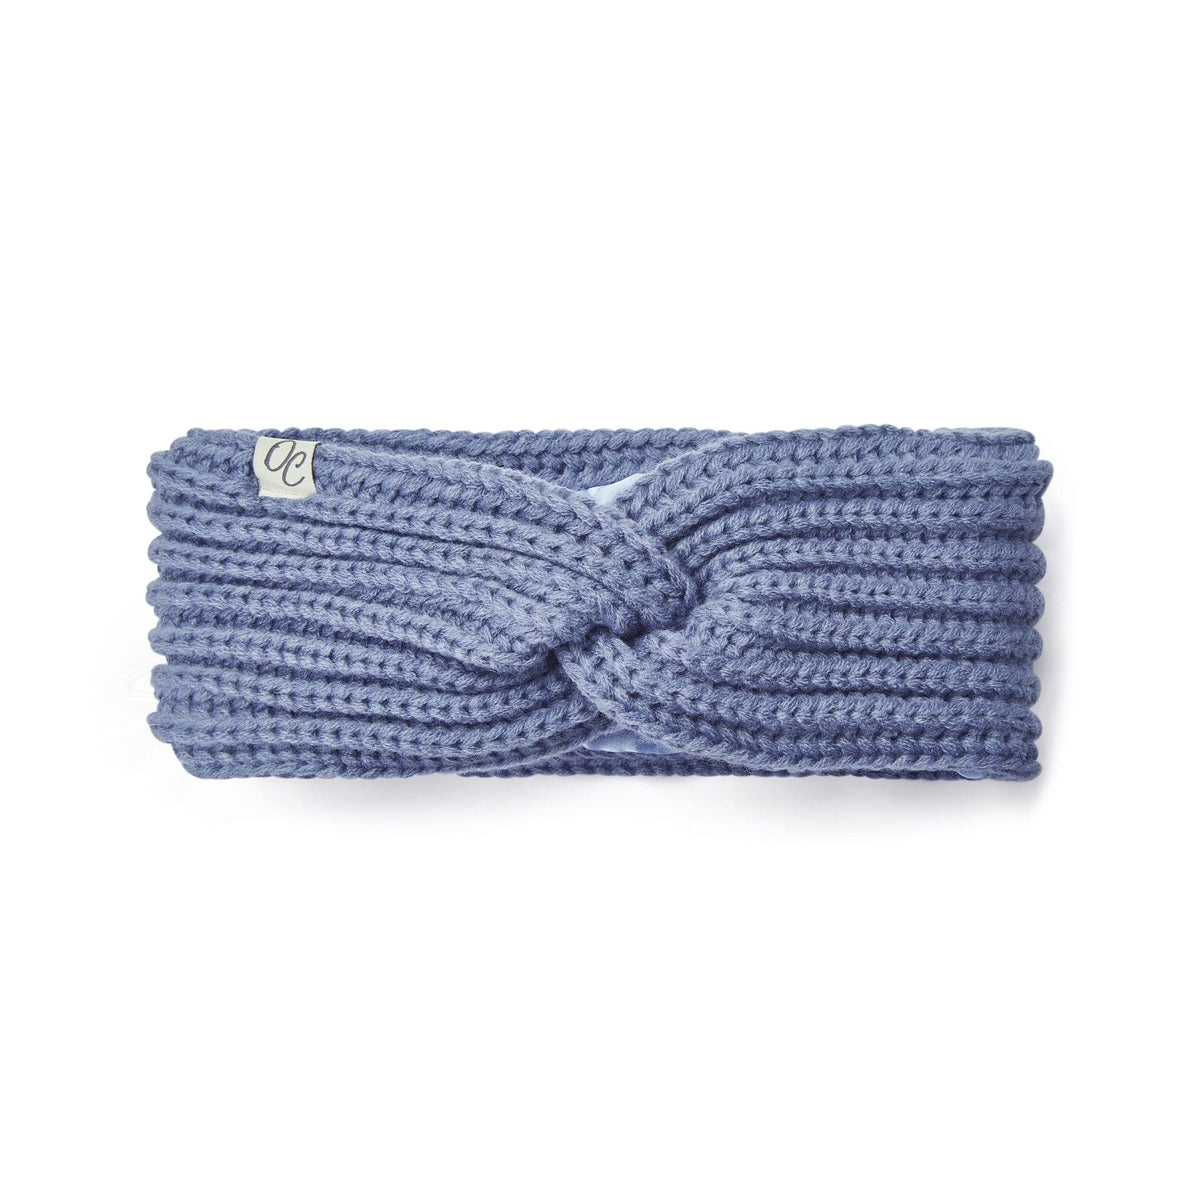 Only Curls Satin Lined Knitted Headband - Dusty Blue - Only Curls